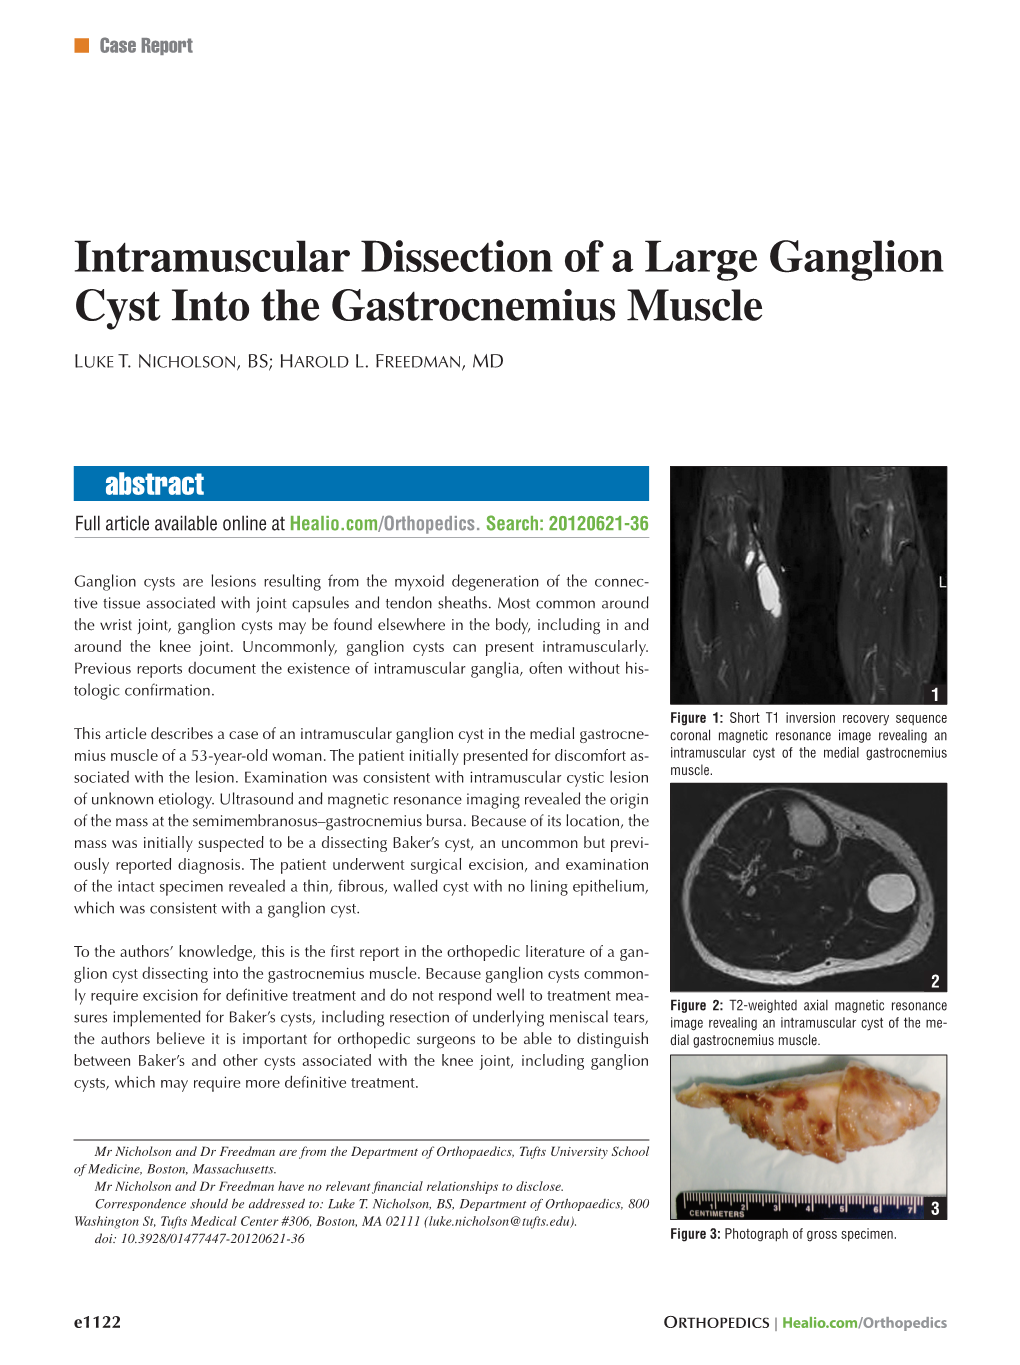 Intramuscular Dissection of a Large Ganglion Cyst Into the Gastrocnemius Muscle